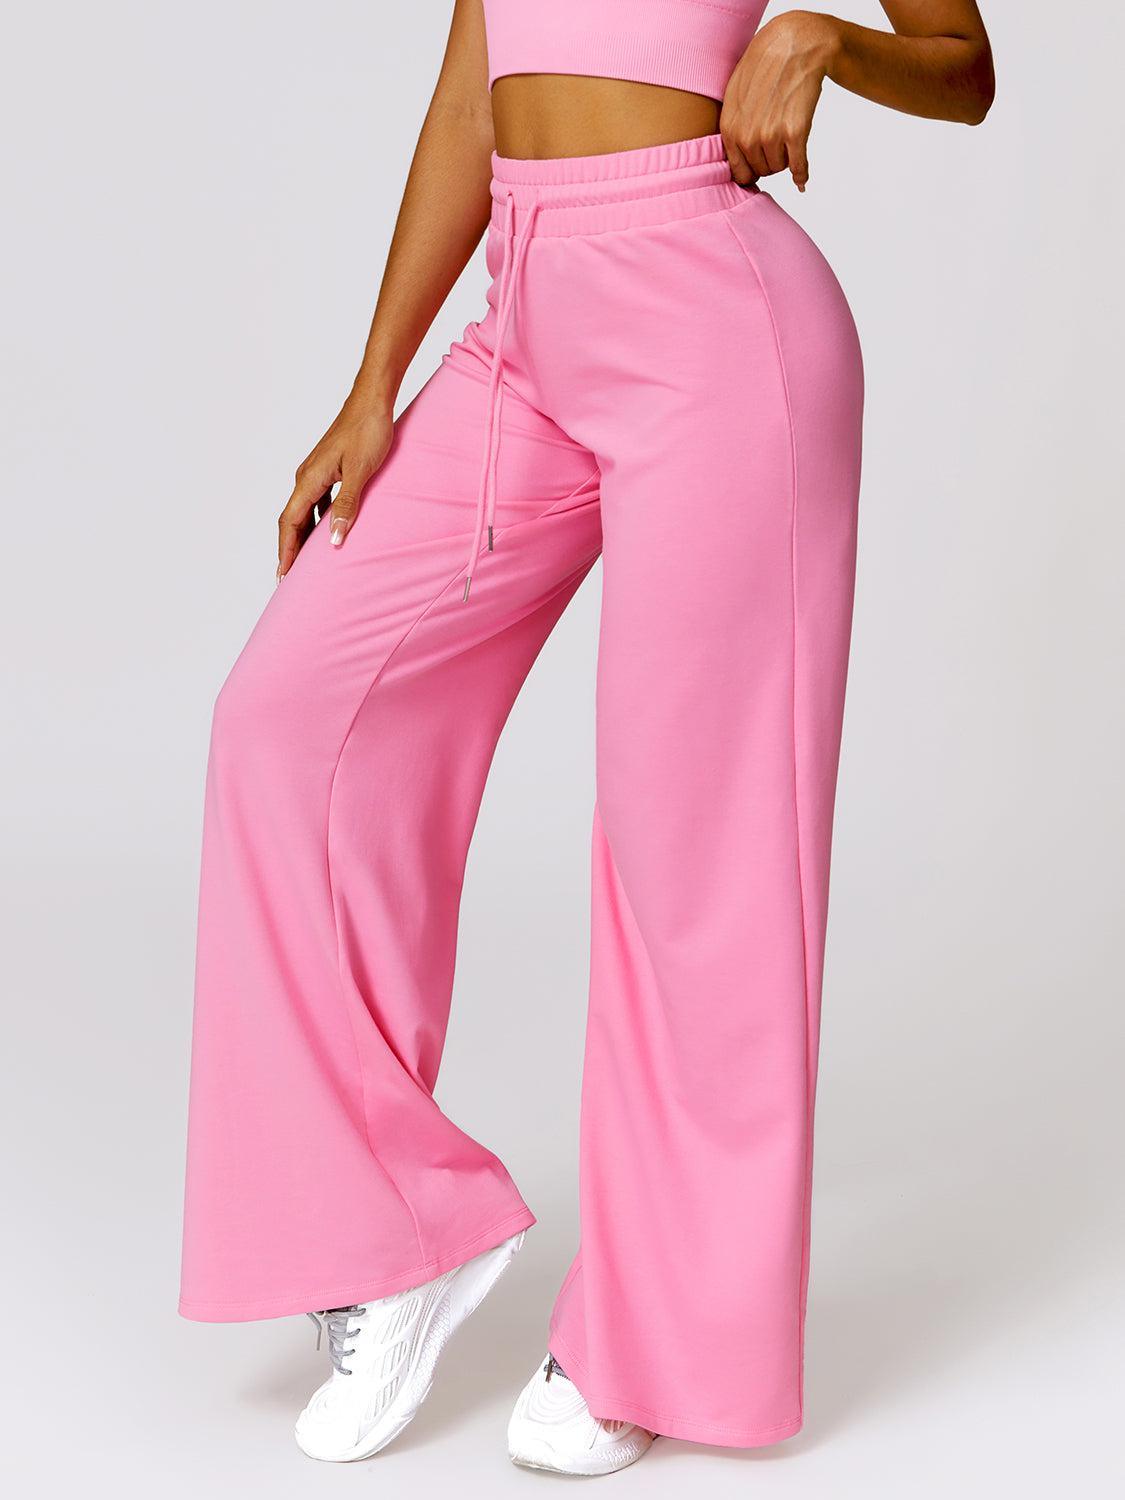 a woman in a pink crop top and wide legged pants